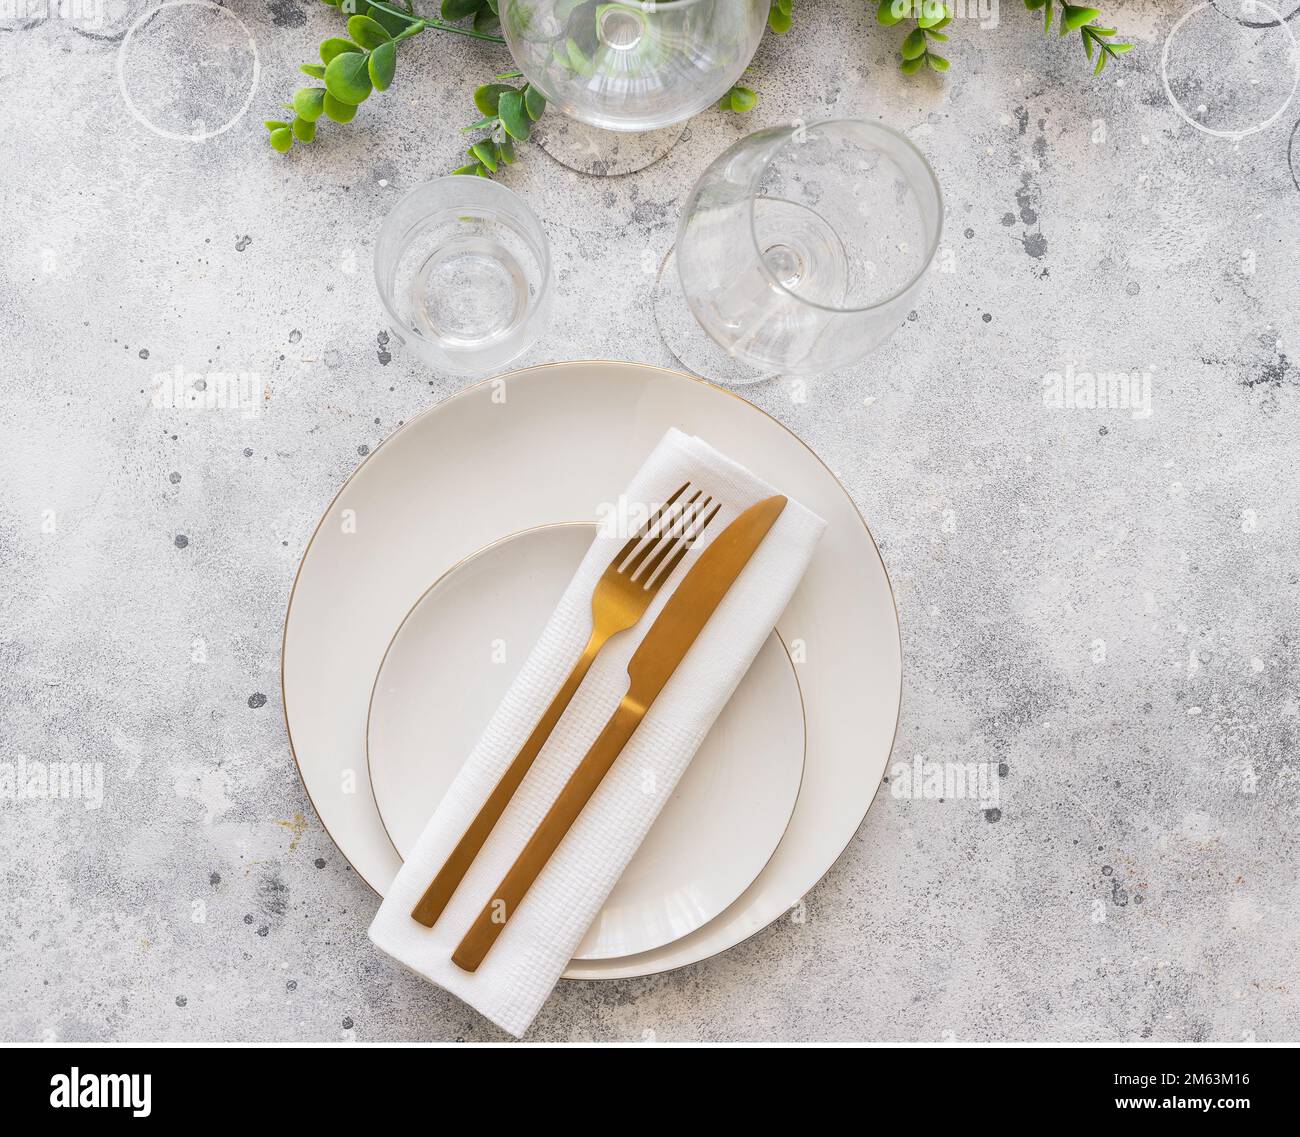 Table setting with textured wine glasses, candles and leaves. Stock Photo  by puhimec